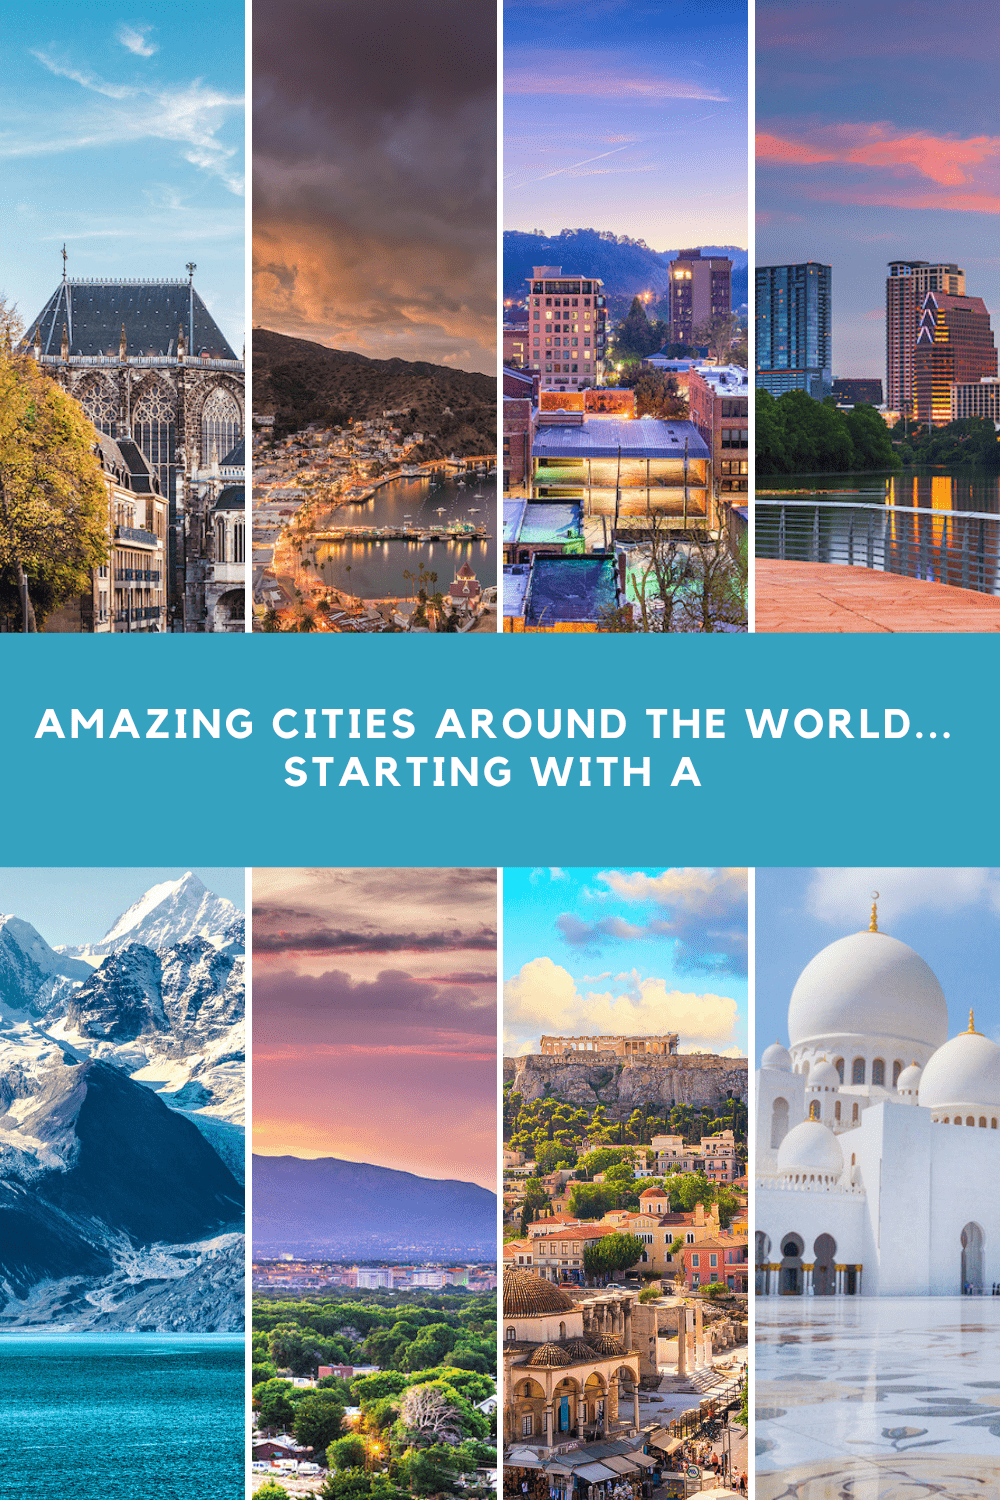 Amazing cities around the world... Starting with A